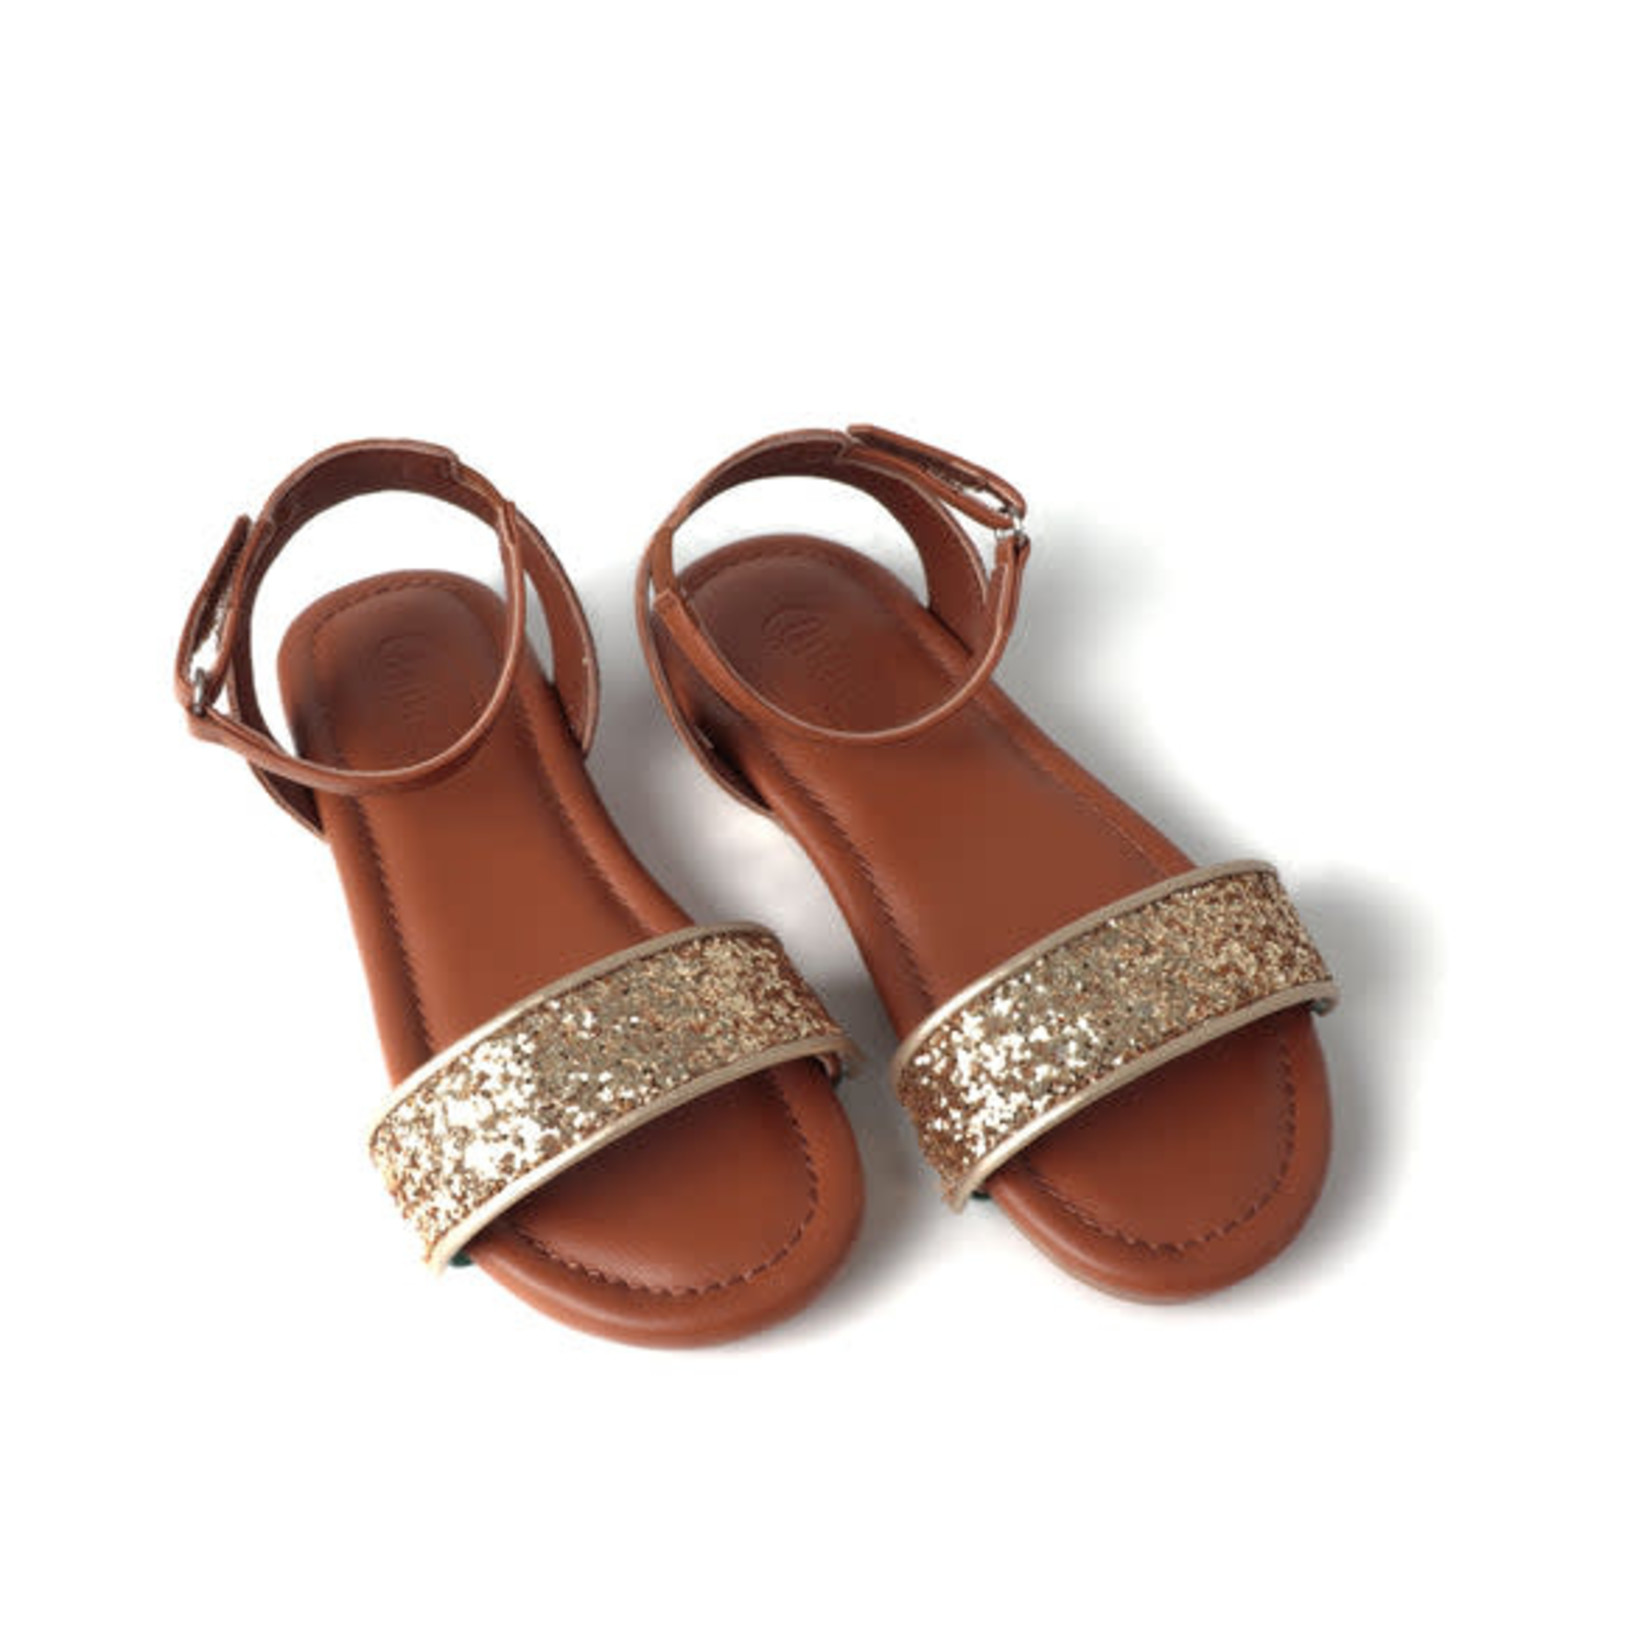 Gruvy Shoes Girls Luna Cognac by Gruvy Shoes